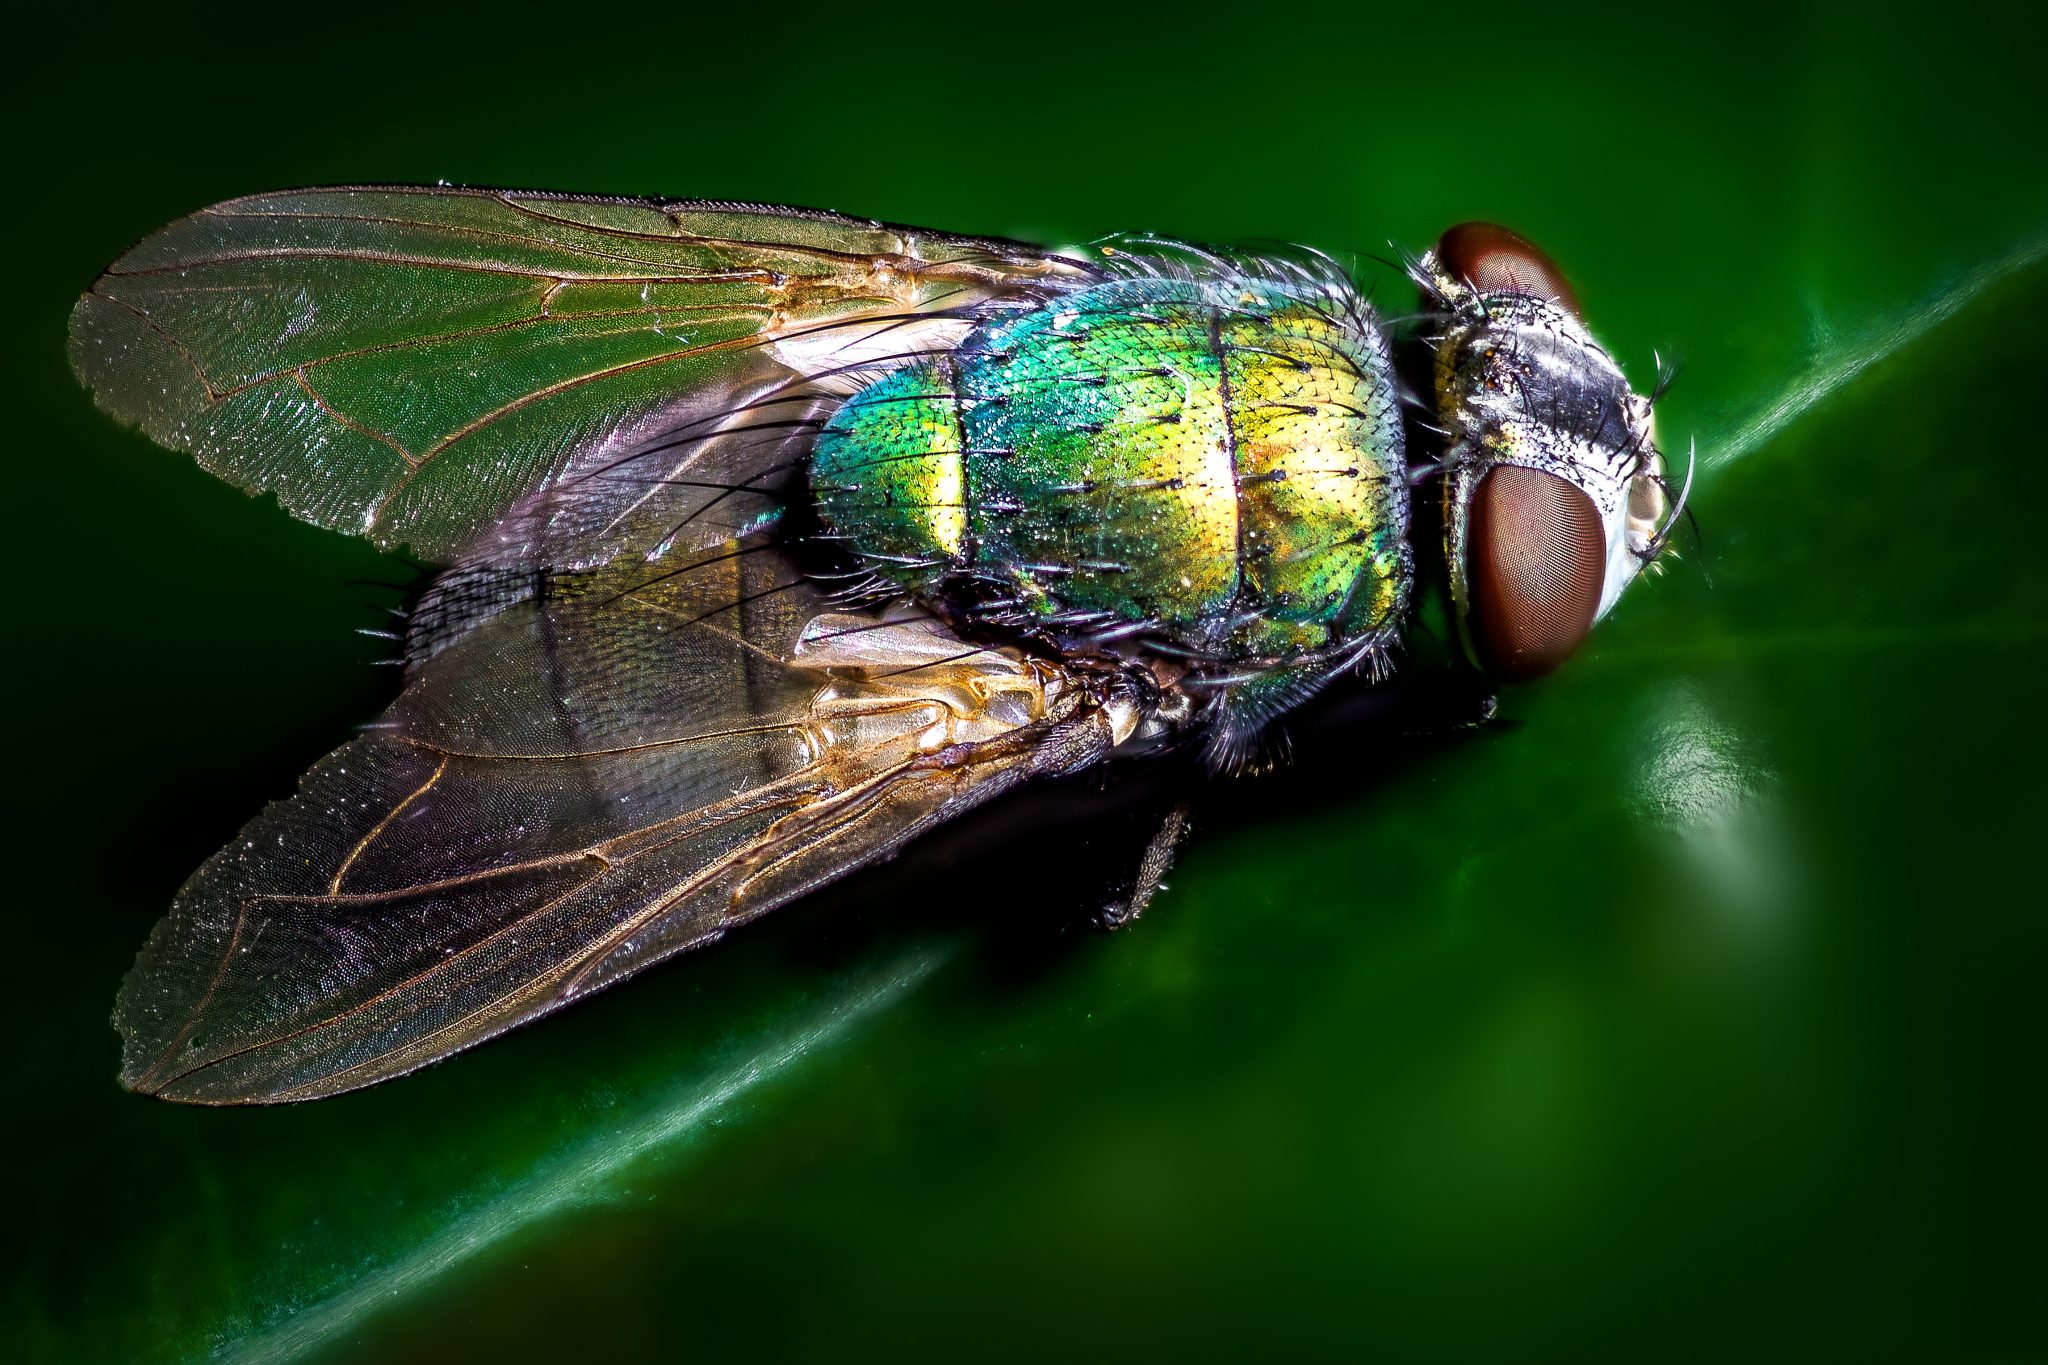 Mount Up with Wings As Horseflies?